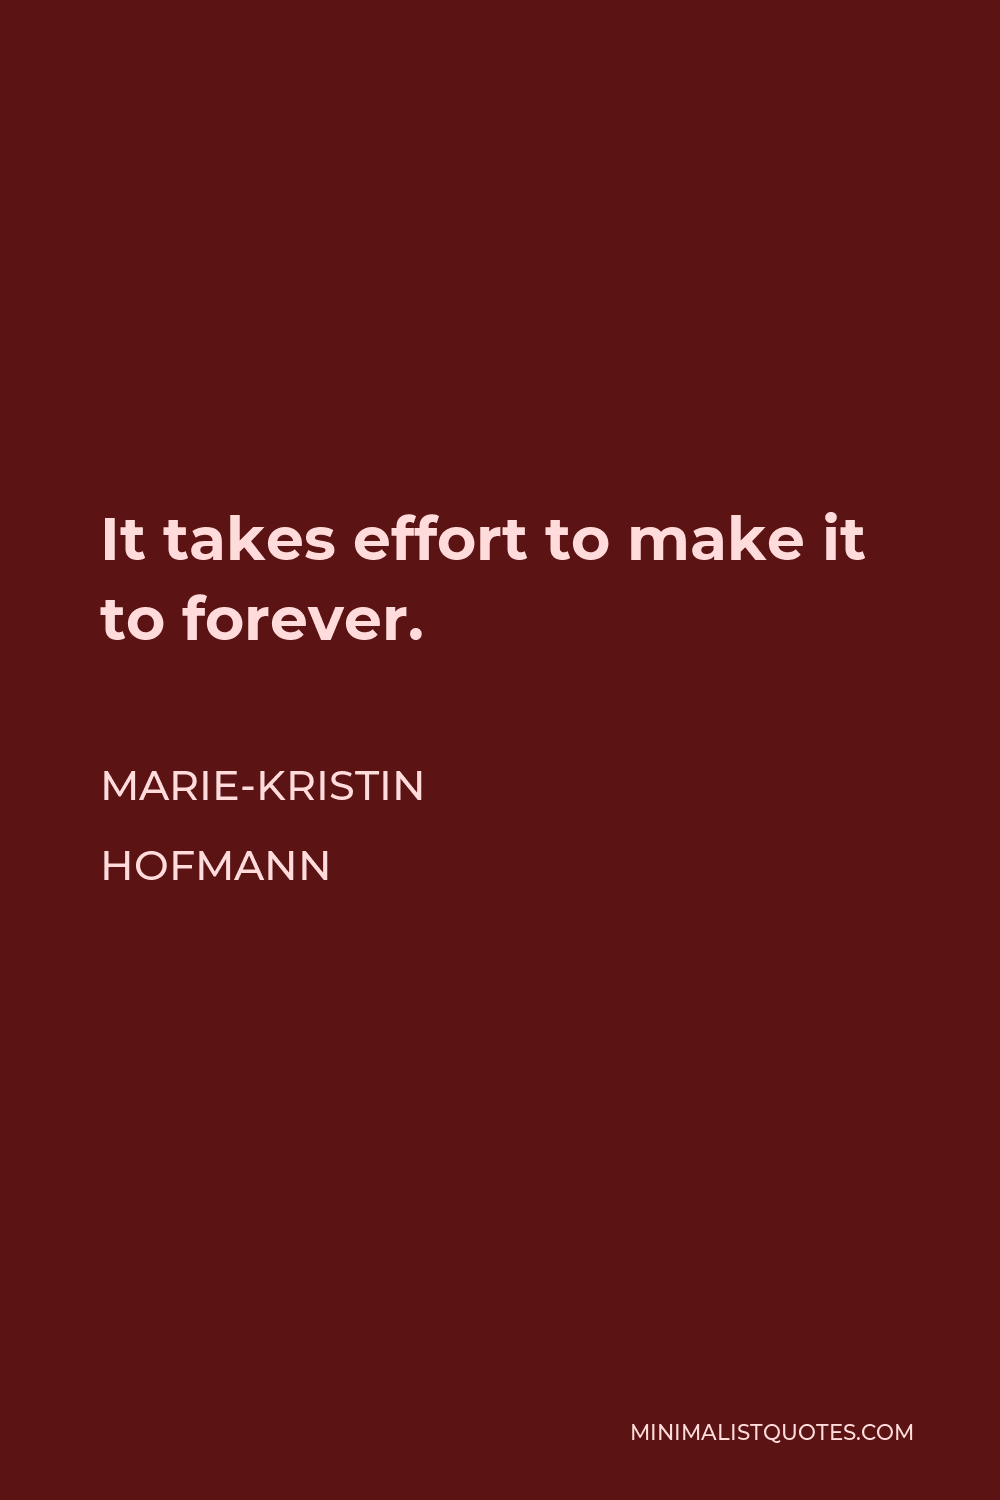 Marie-Kristin Hofmann Quote - It takes effort to make it to forever.